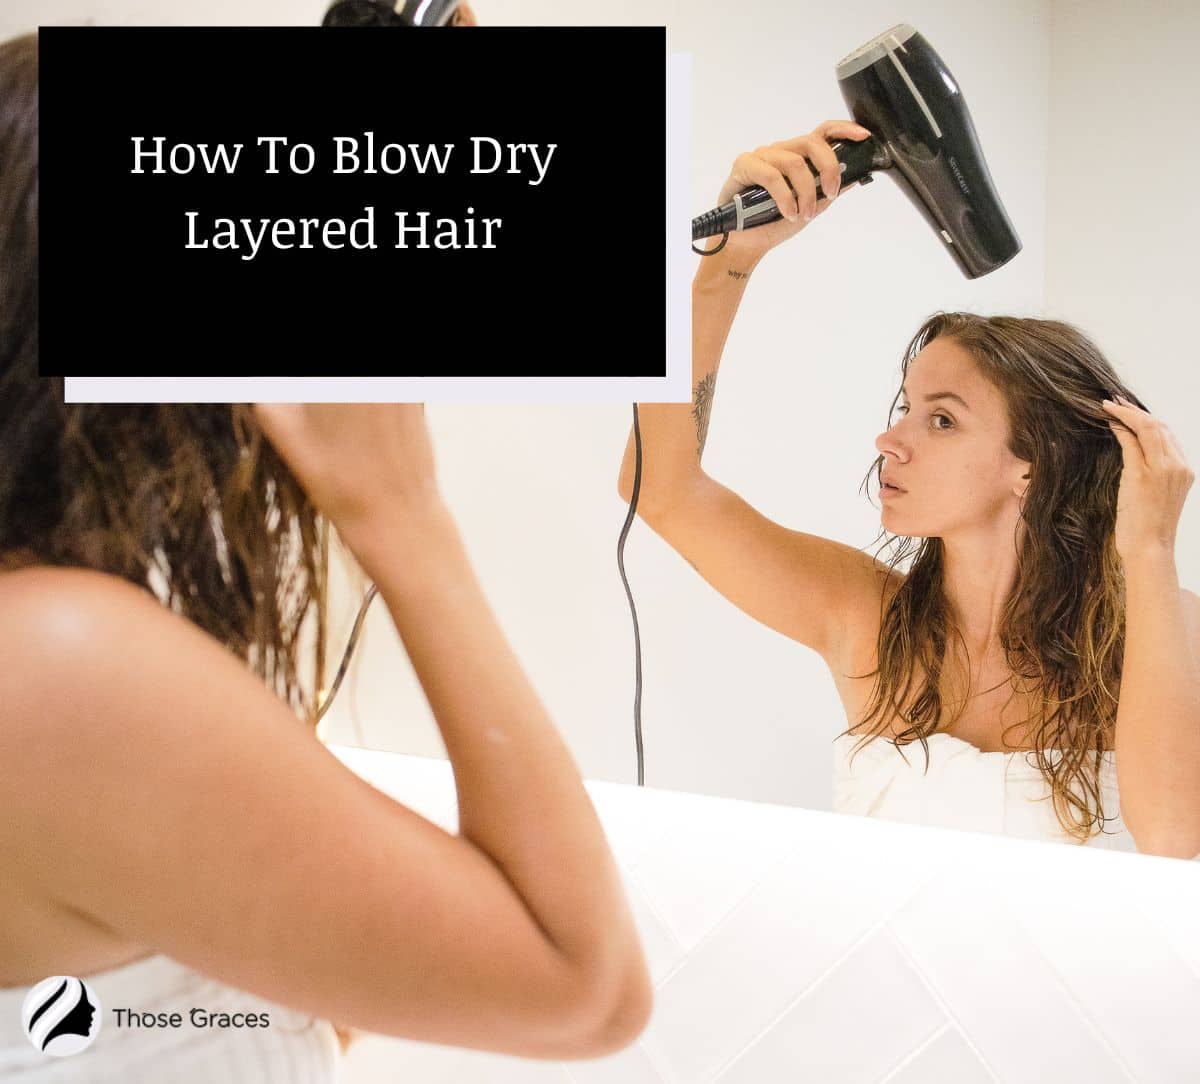 woman showing how to blow dry layered hair properly